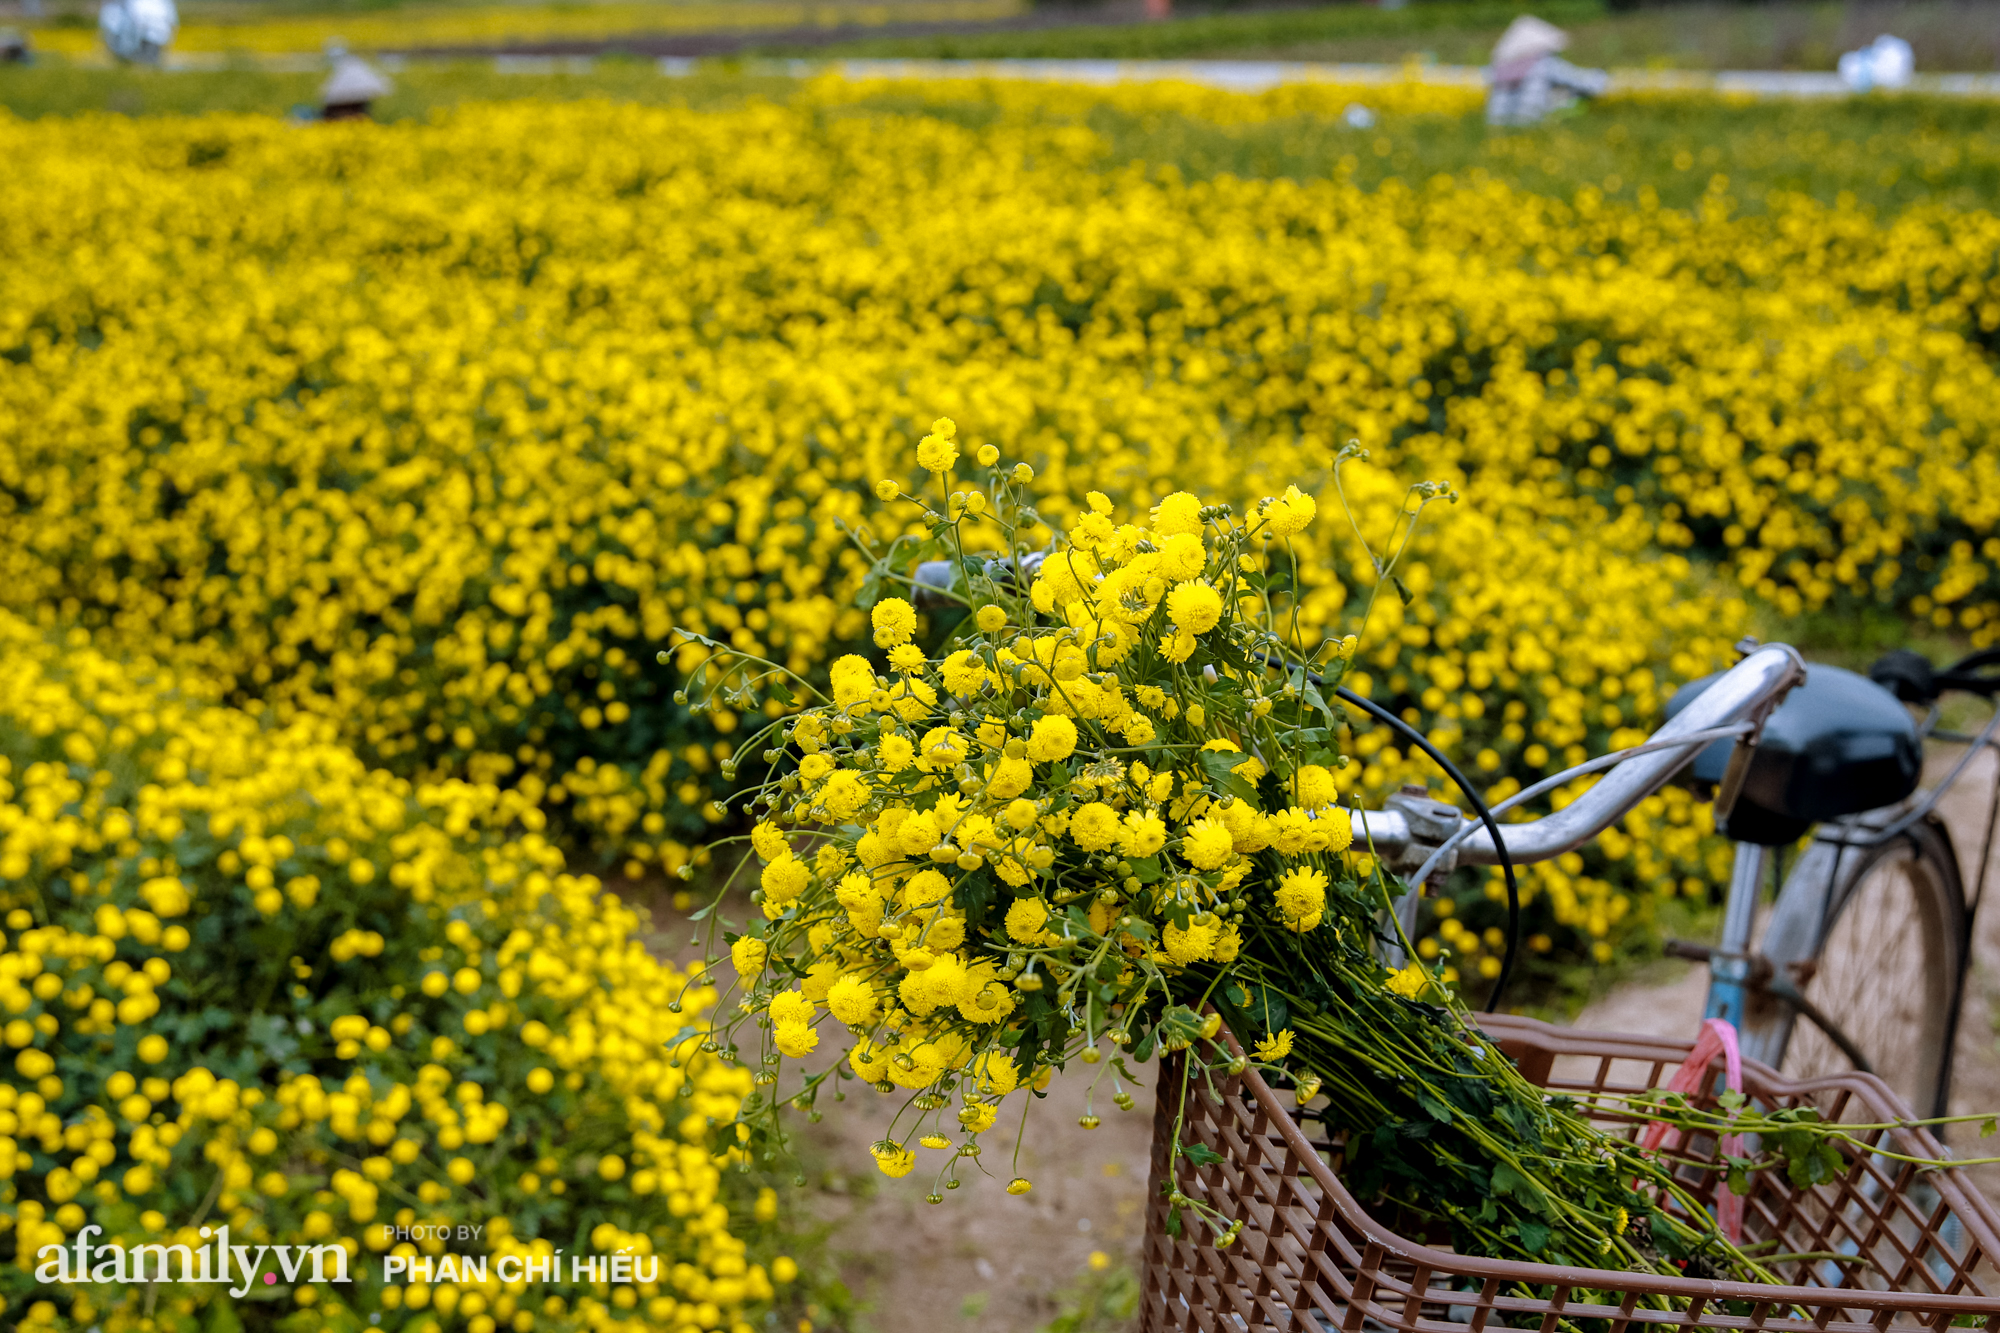 Visit a hundred-year village near Hanoi, possessing the "kingly" chrysanthemum fields  golden, making people everywhere pouring in to take pictures - Photo 5.